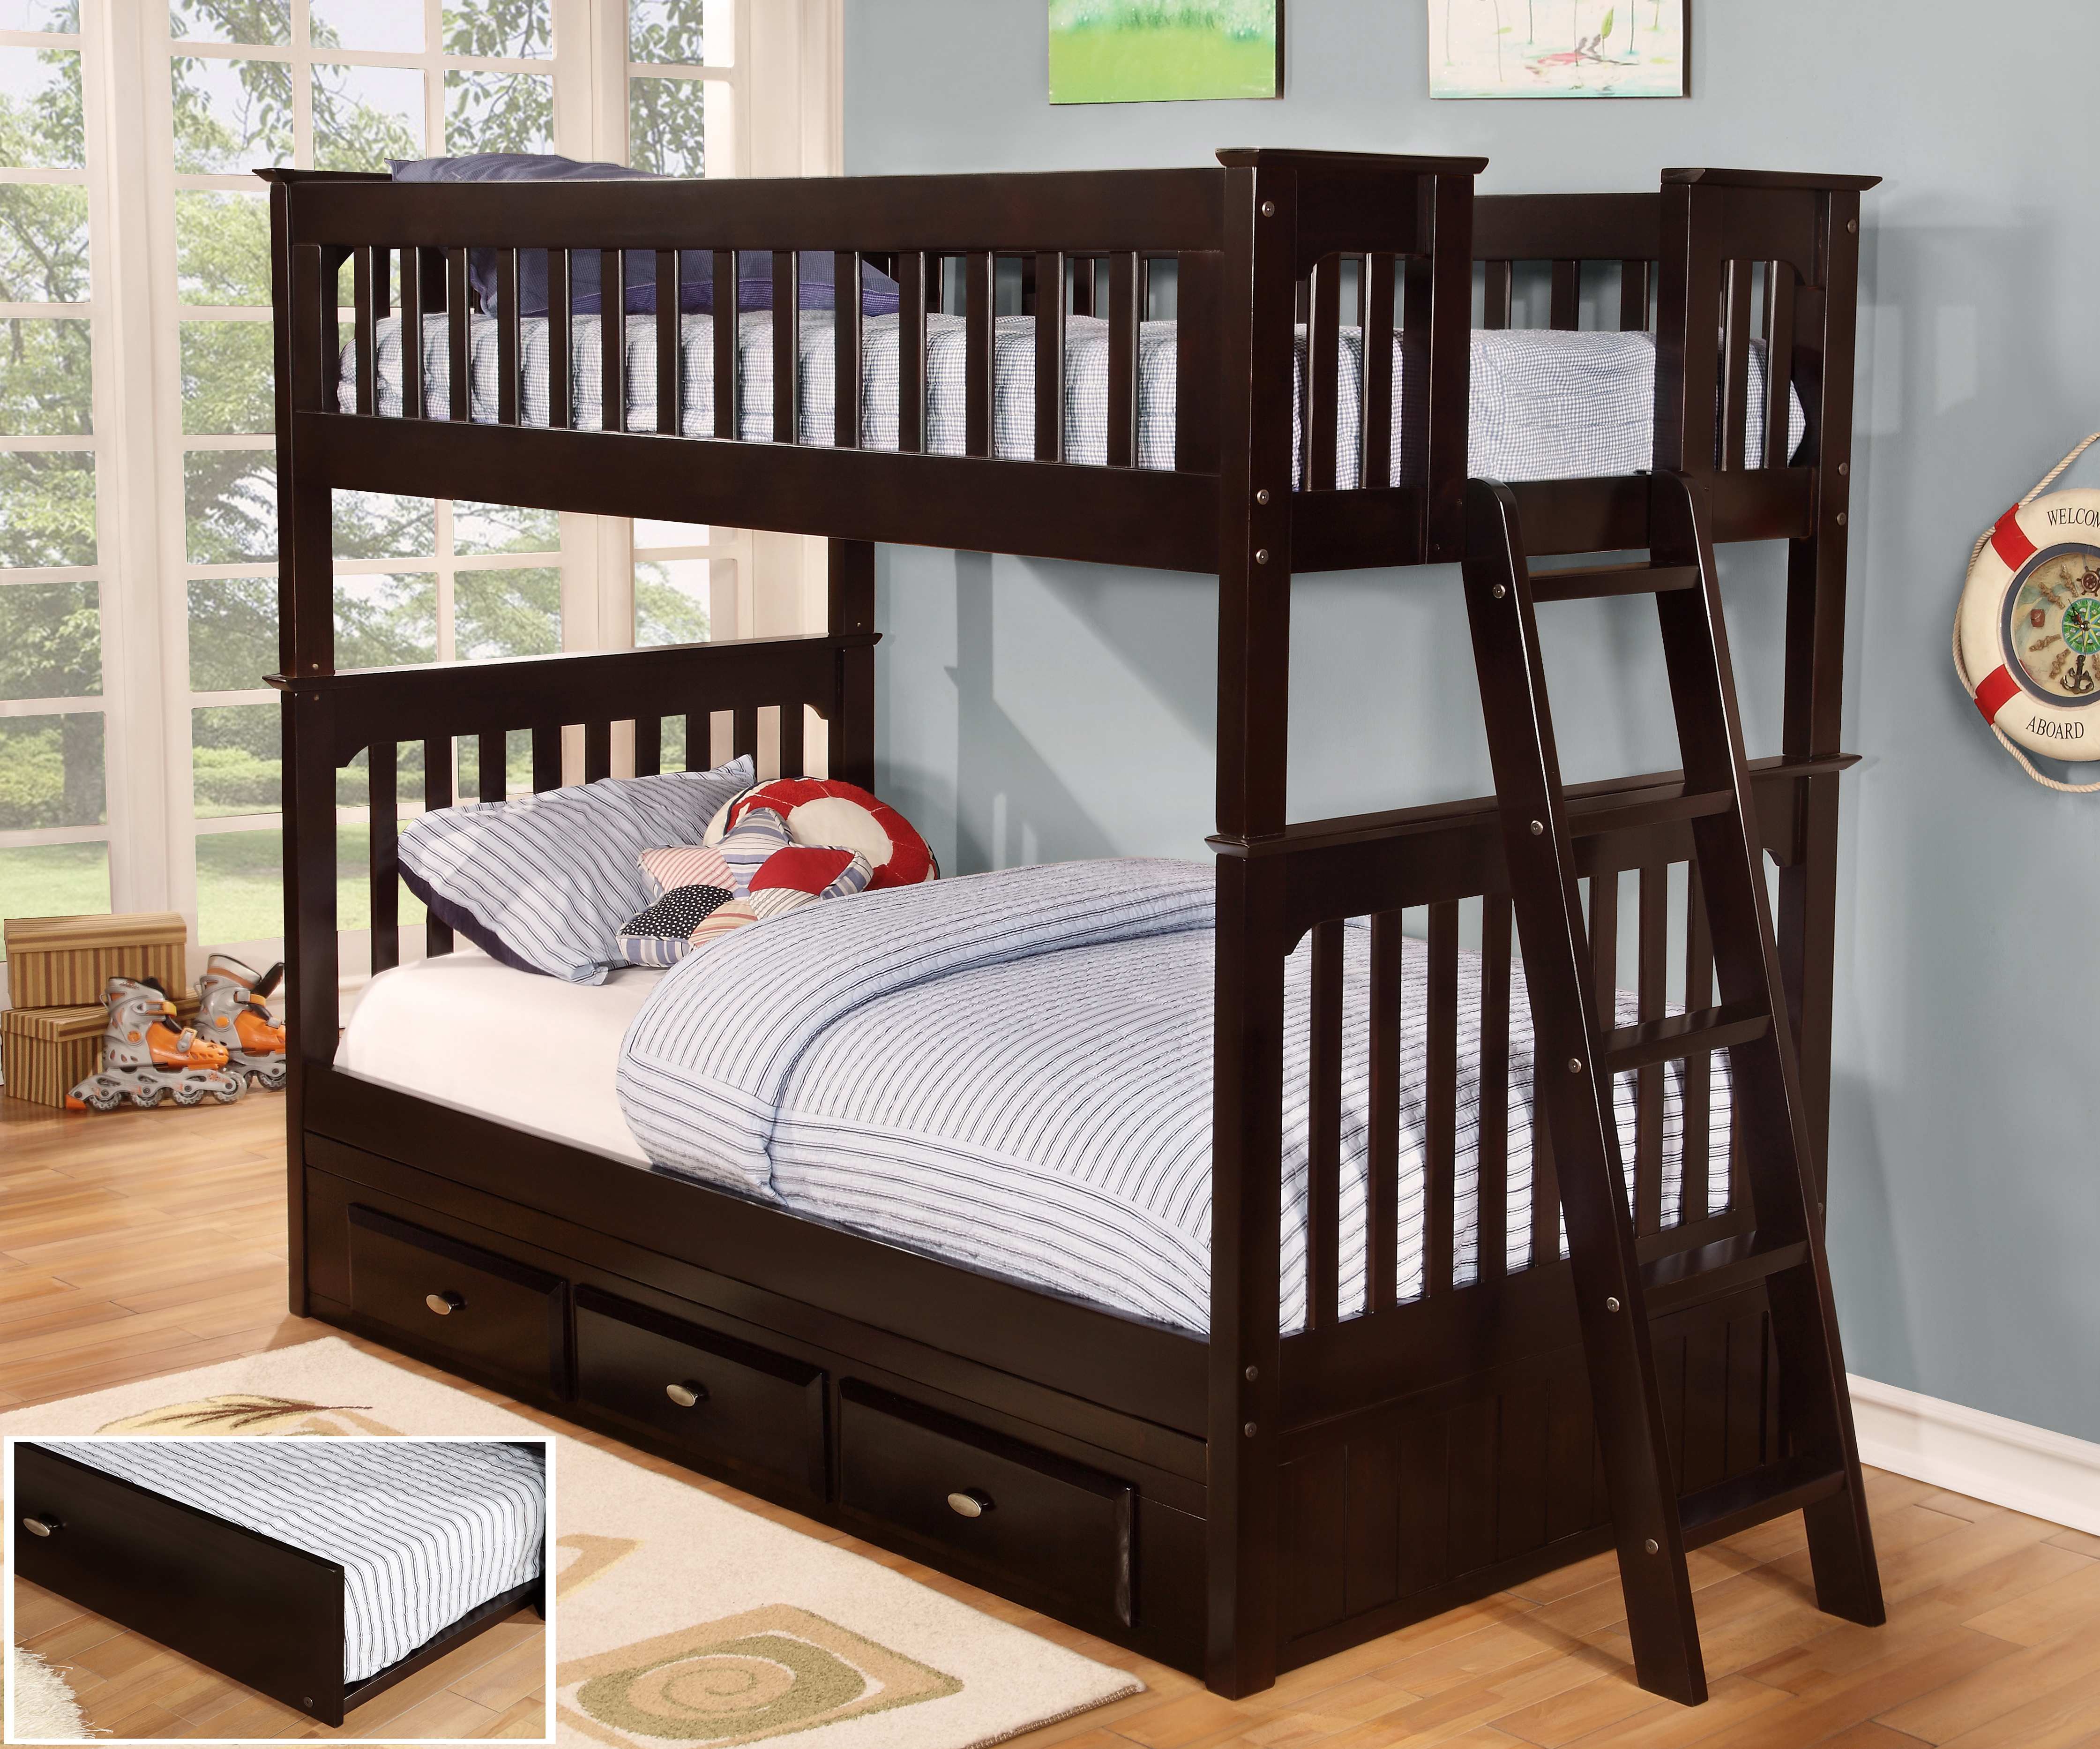 Discovery World Furniture Twin over Twin Espresso Bunk Beds KFS STORES